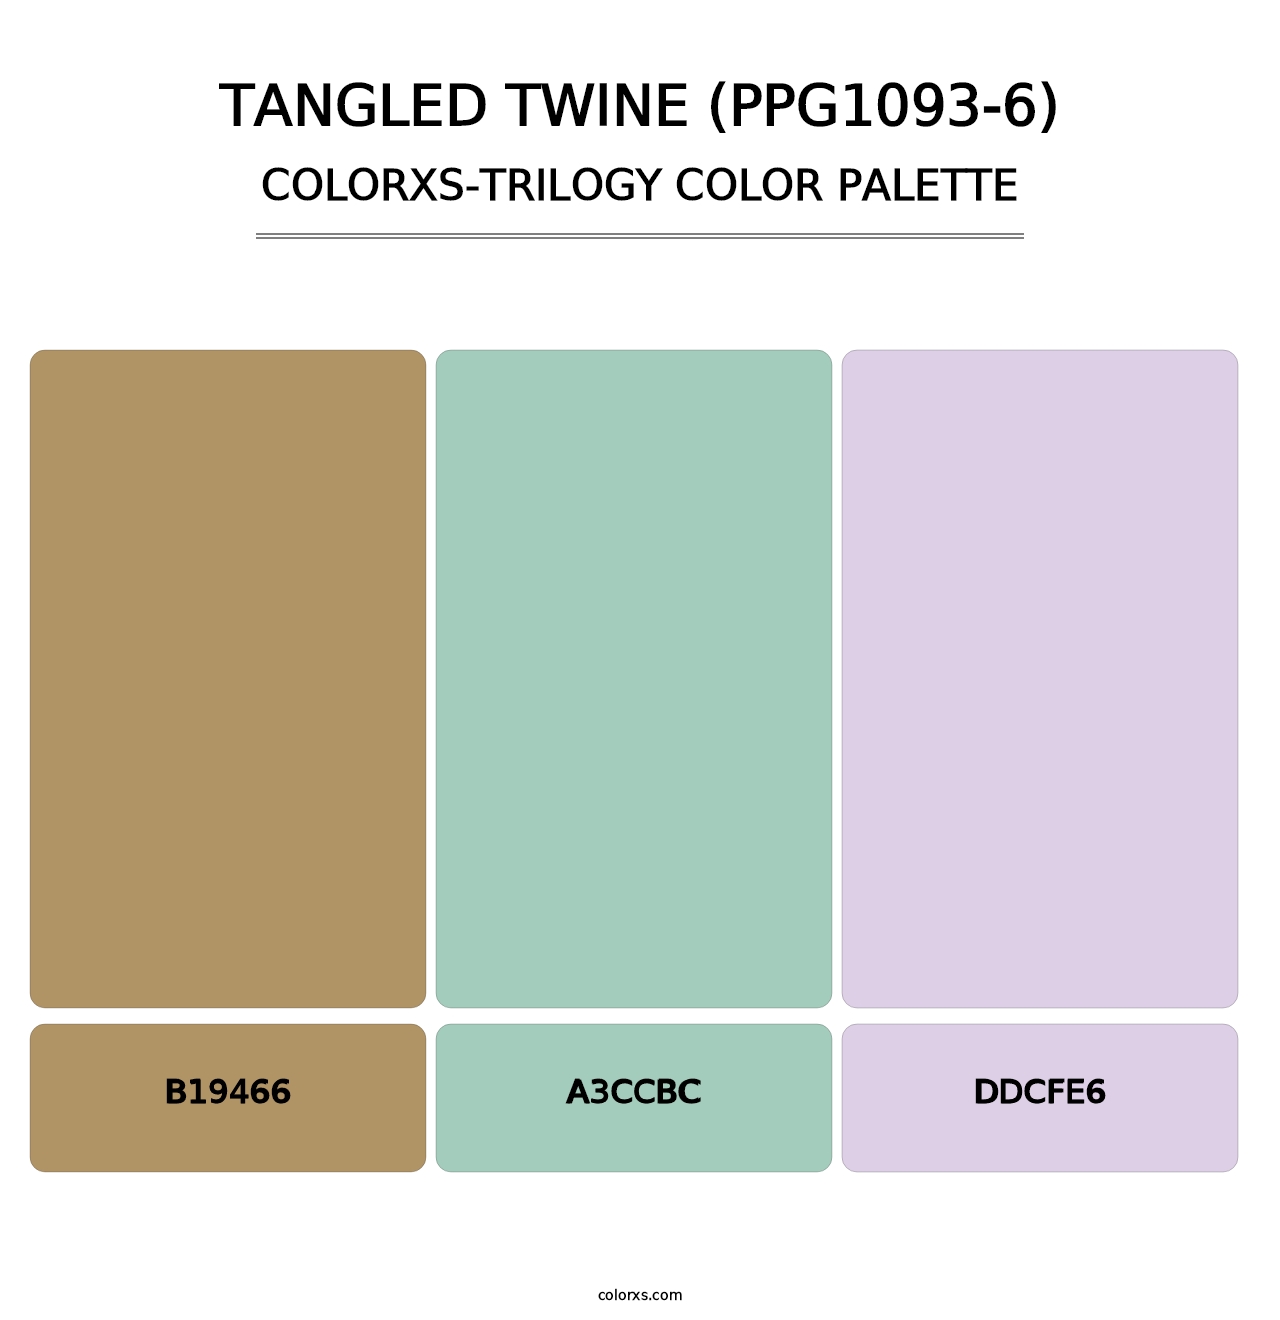 Tangled Twine (PPG1093-6) - Colorxs Trilogy Palette